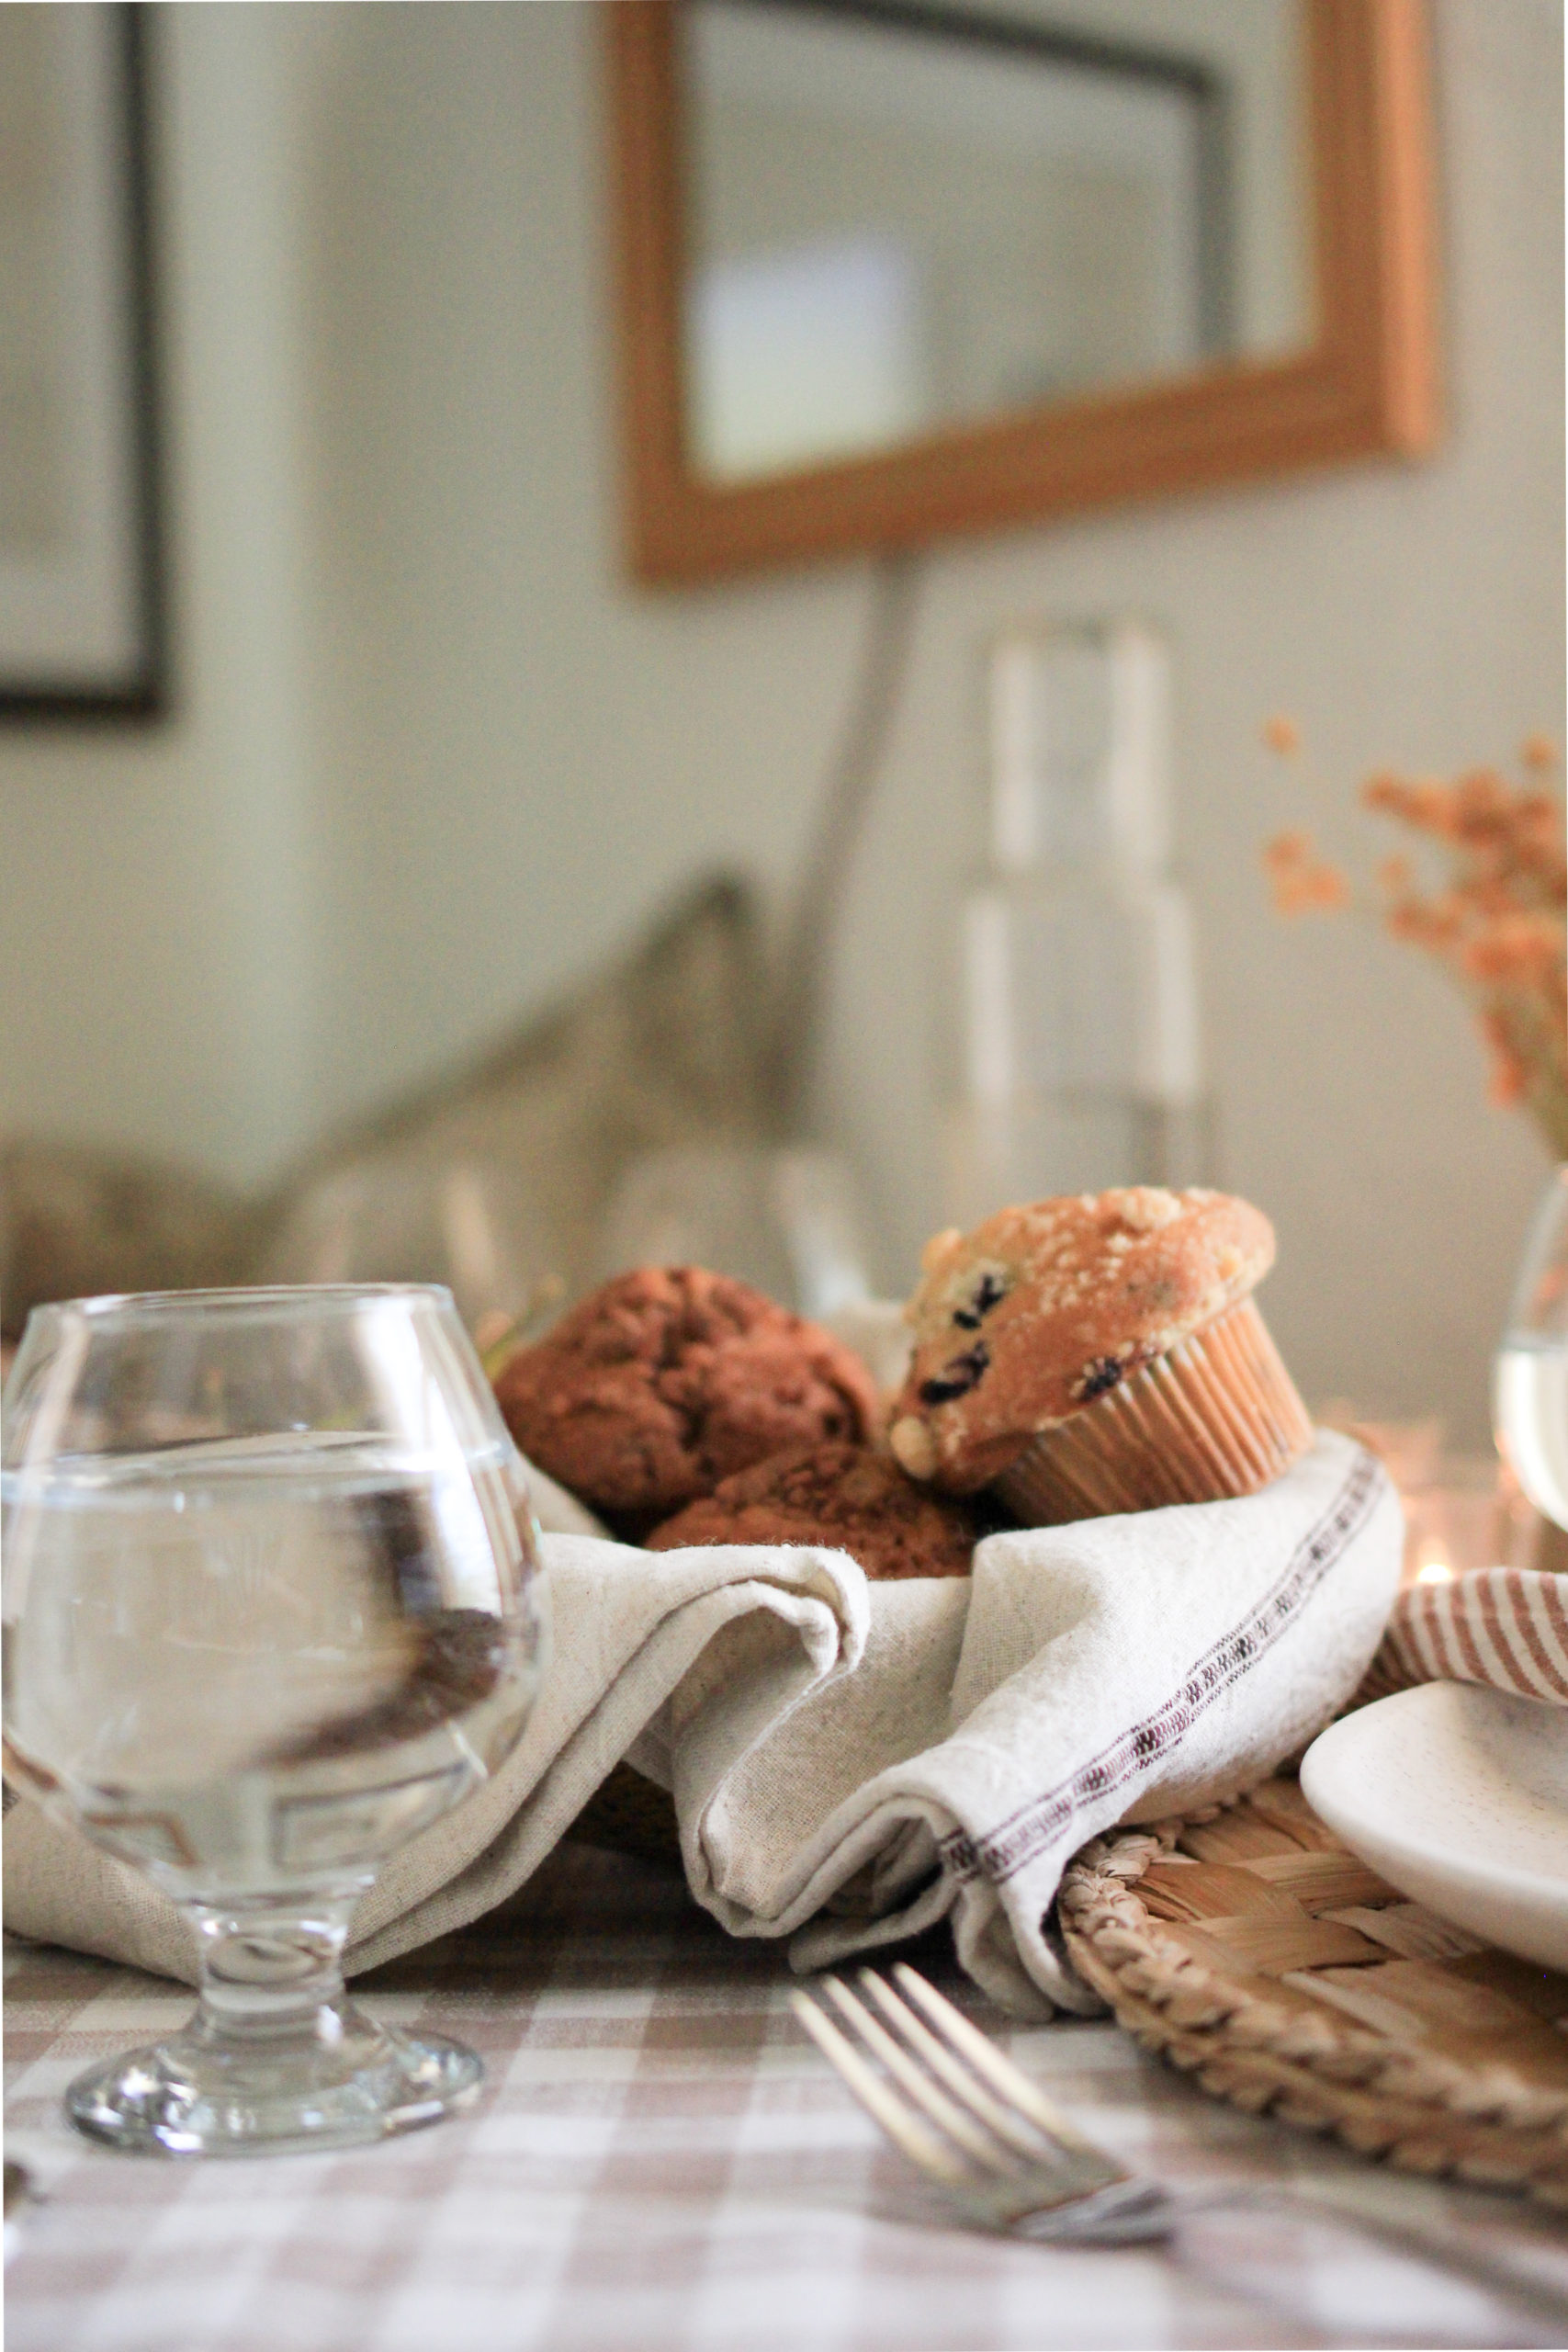 Table setting, woven basket with hand towel filler holding assorted muffins.